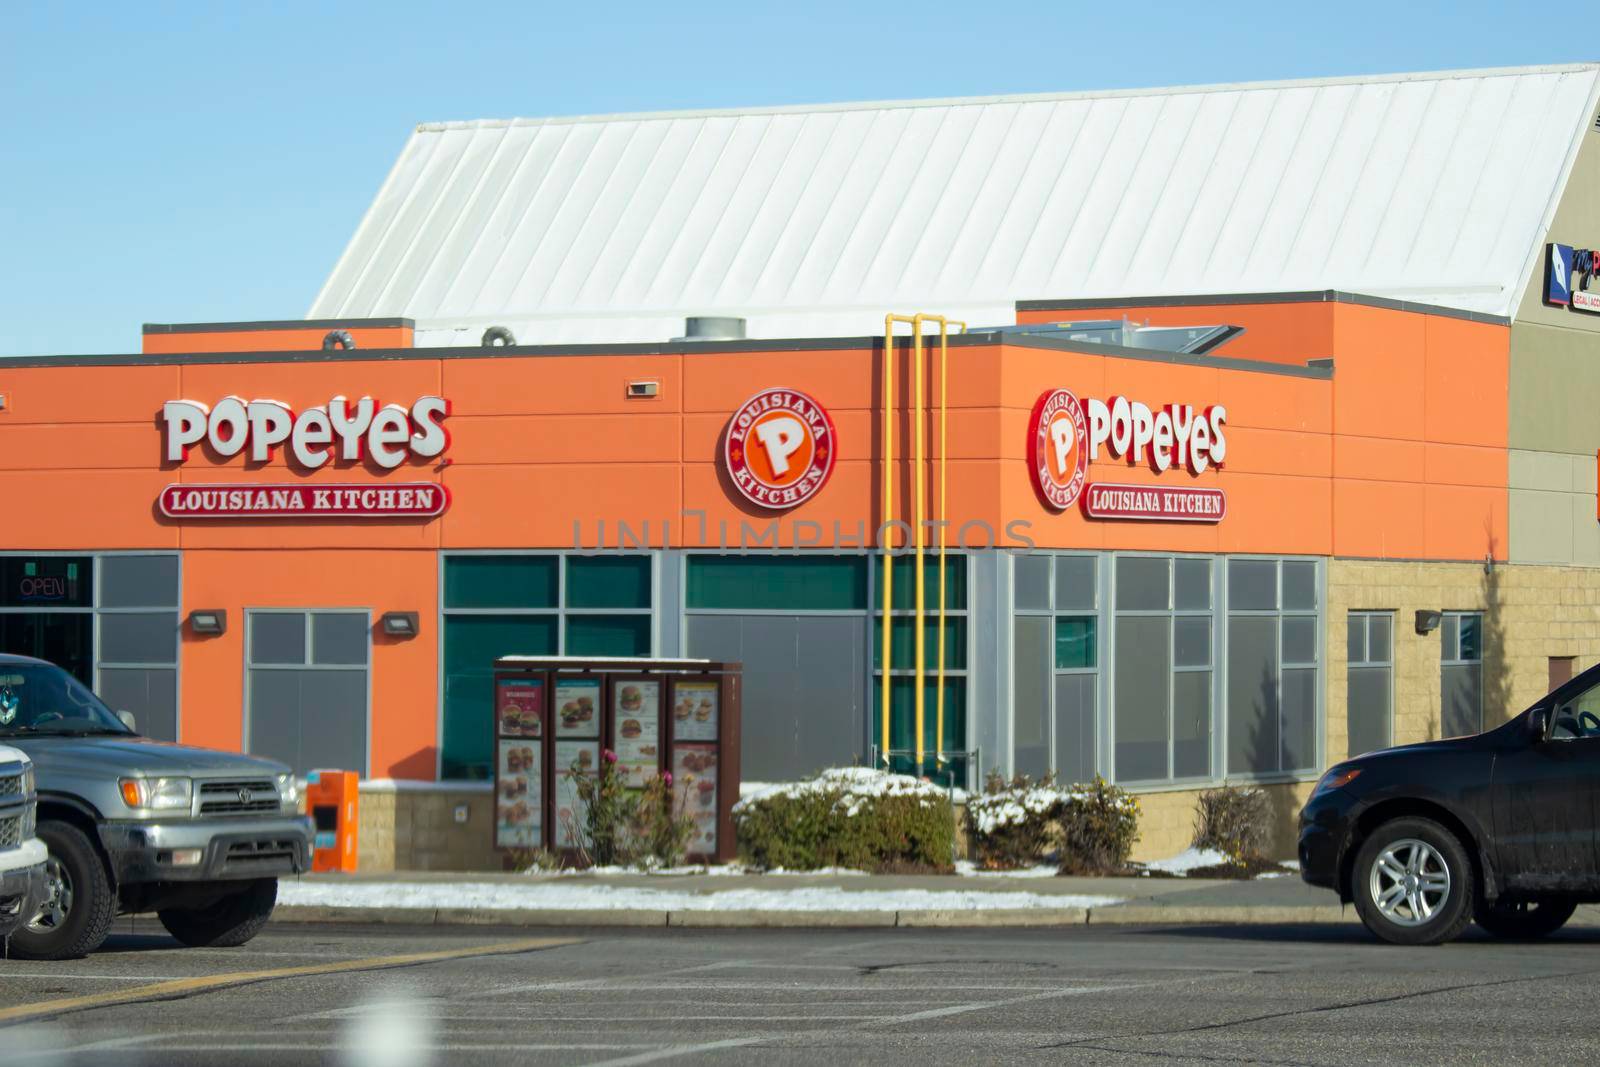 Calgary Alberta, Canada. Oct 17, 2020. Popeyes is an American multinational chain of fried chicken fast food restaurants from New Orleans, Louisiana and headquartered in Miami, Florida.